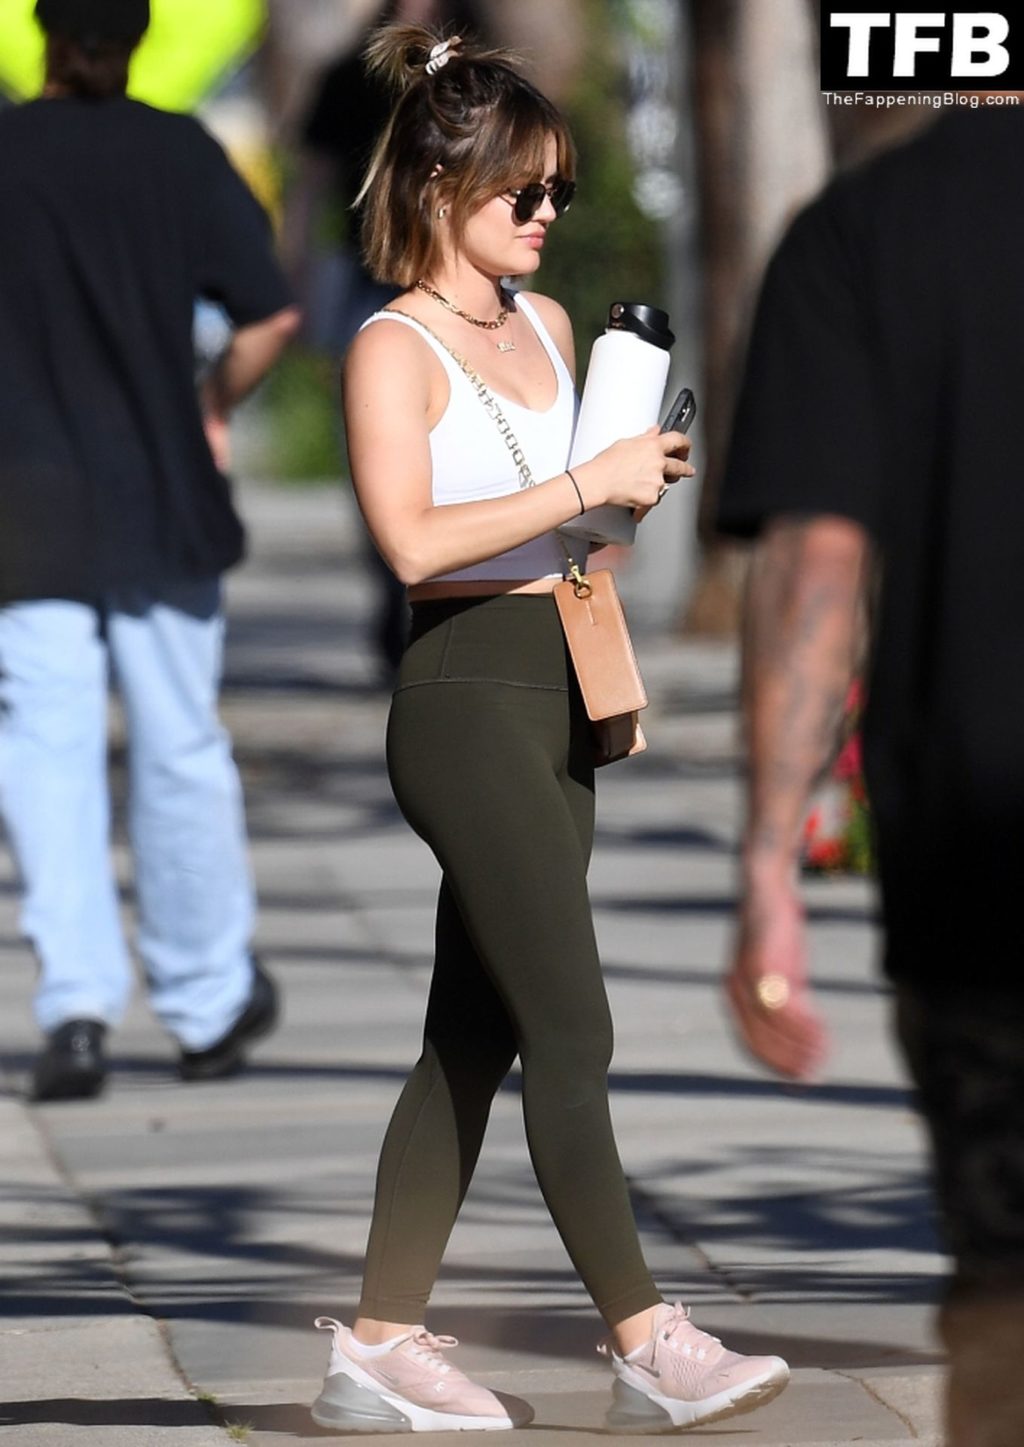 Lucy Hale Sexy The Fappening Blog 19 1024x1447 - Lucy Hale is All Smiles After Working Up a Sweat on the First Day of Spring (22 Photos)